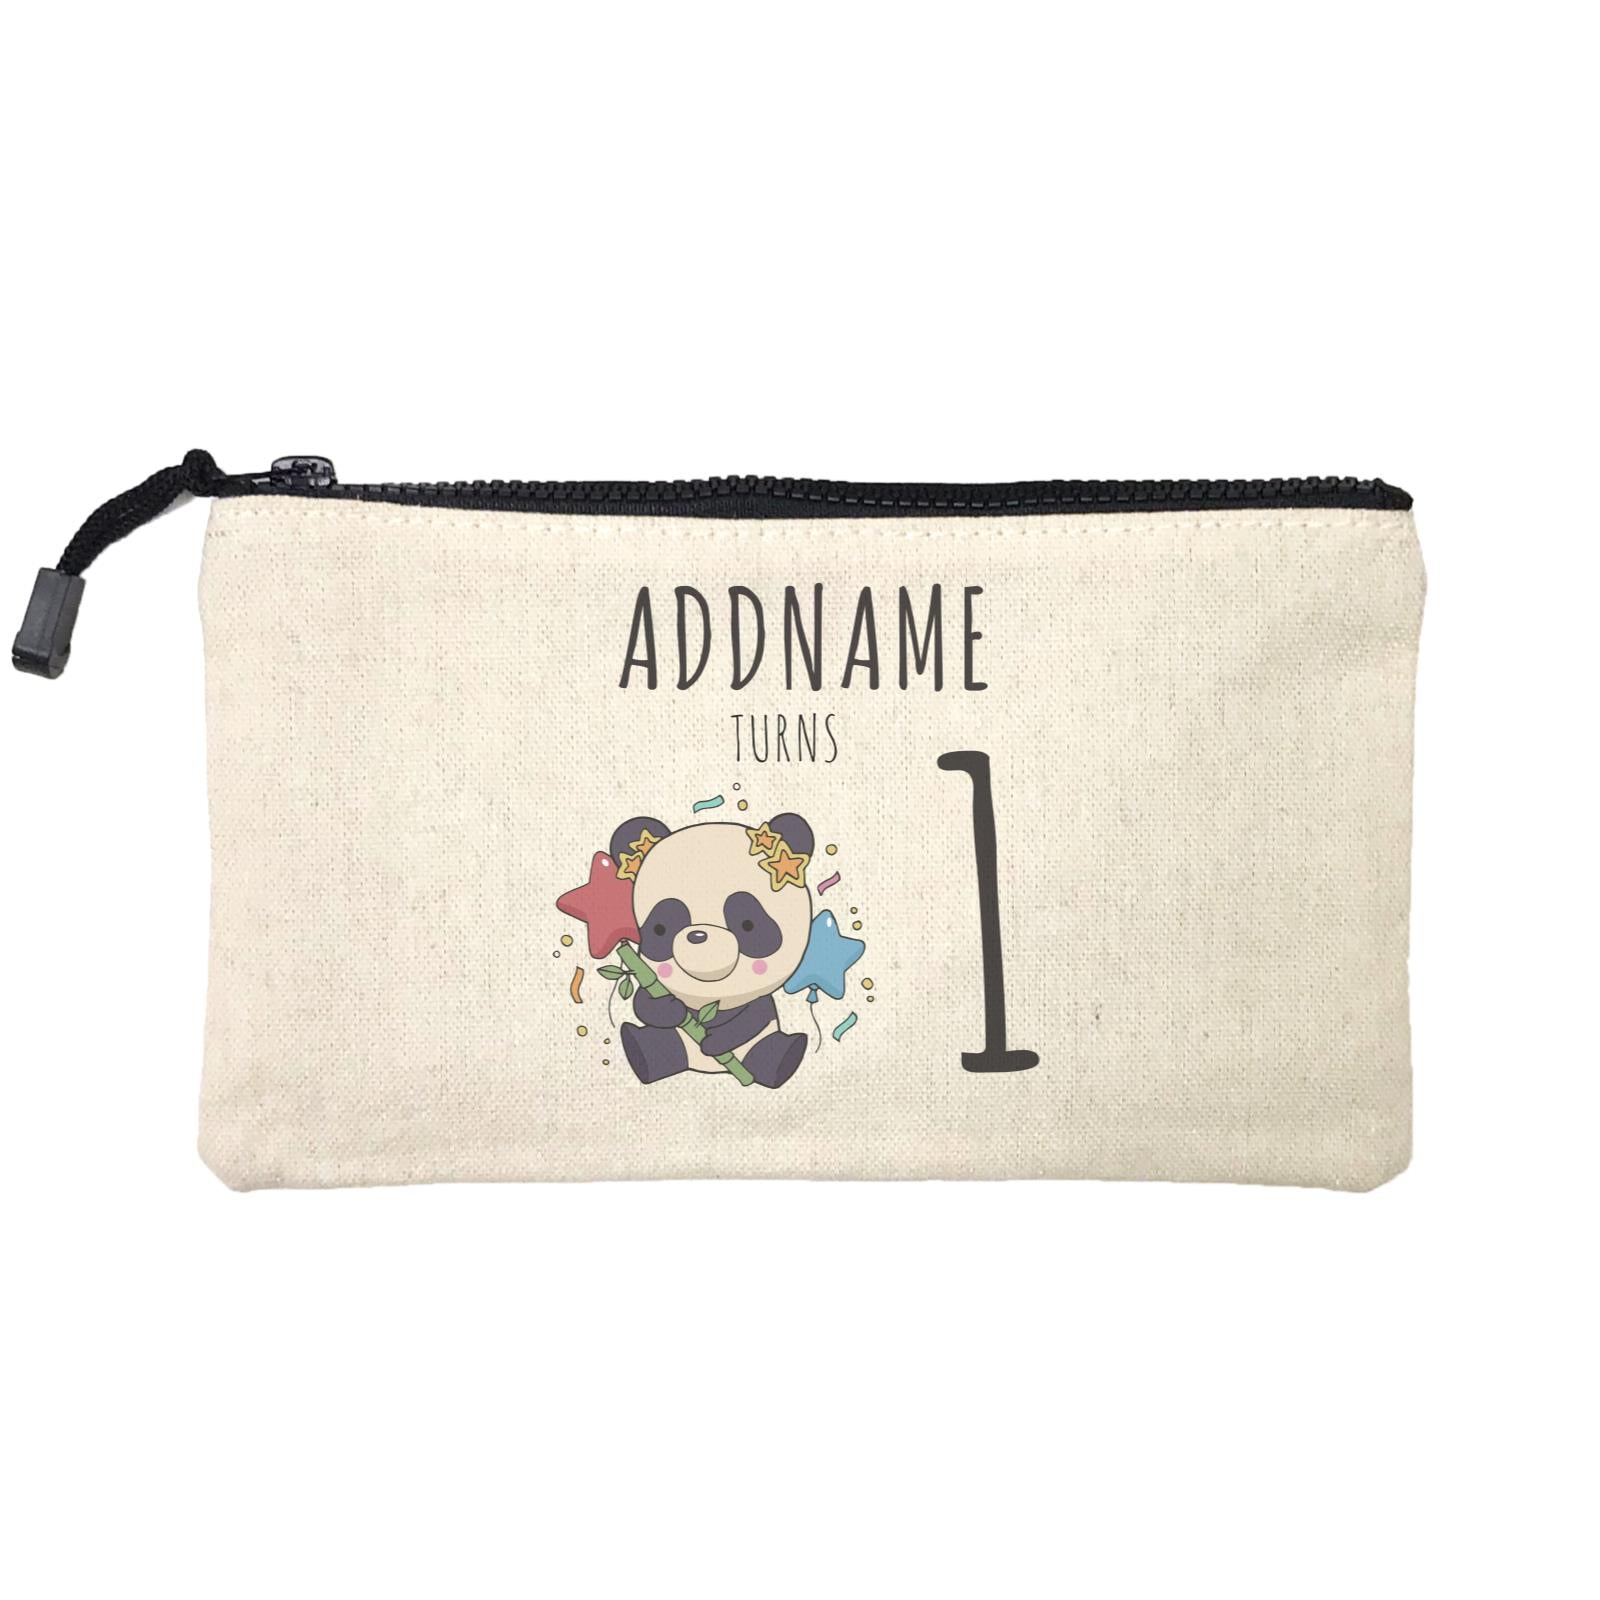 Birthday Sketch Animals Panda with Party Hat Holding Bamboo Addname Turns 1 Mini Accessories Stationery Pouch